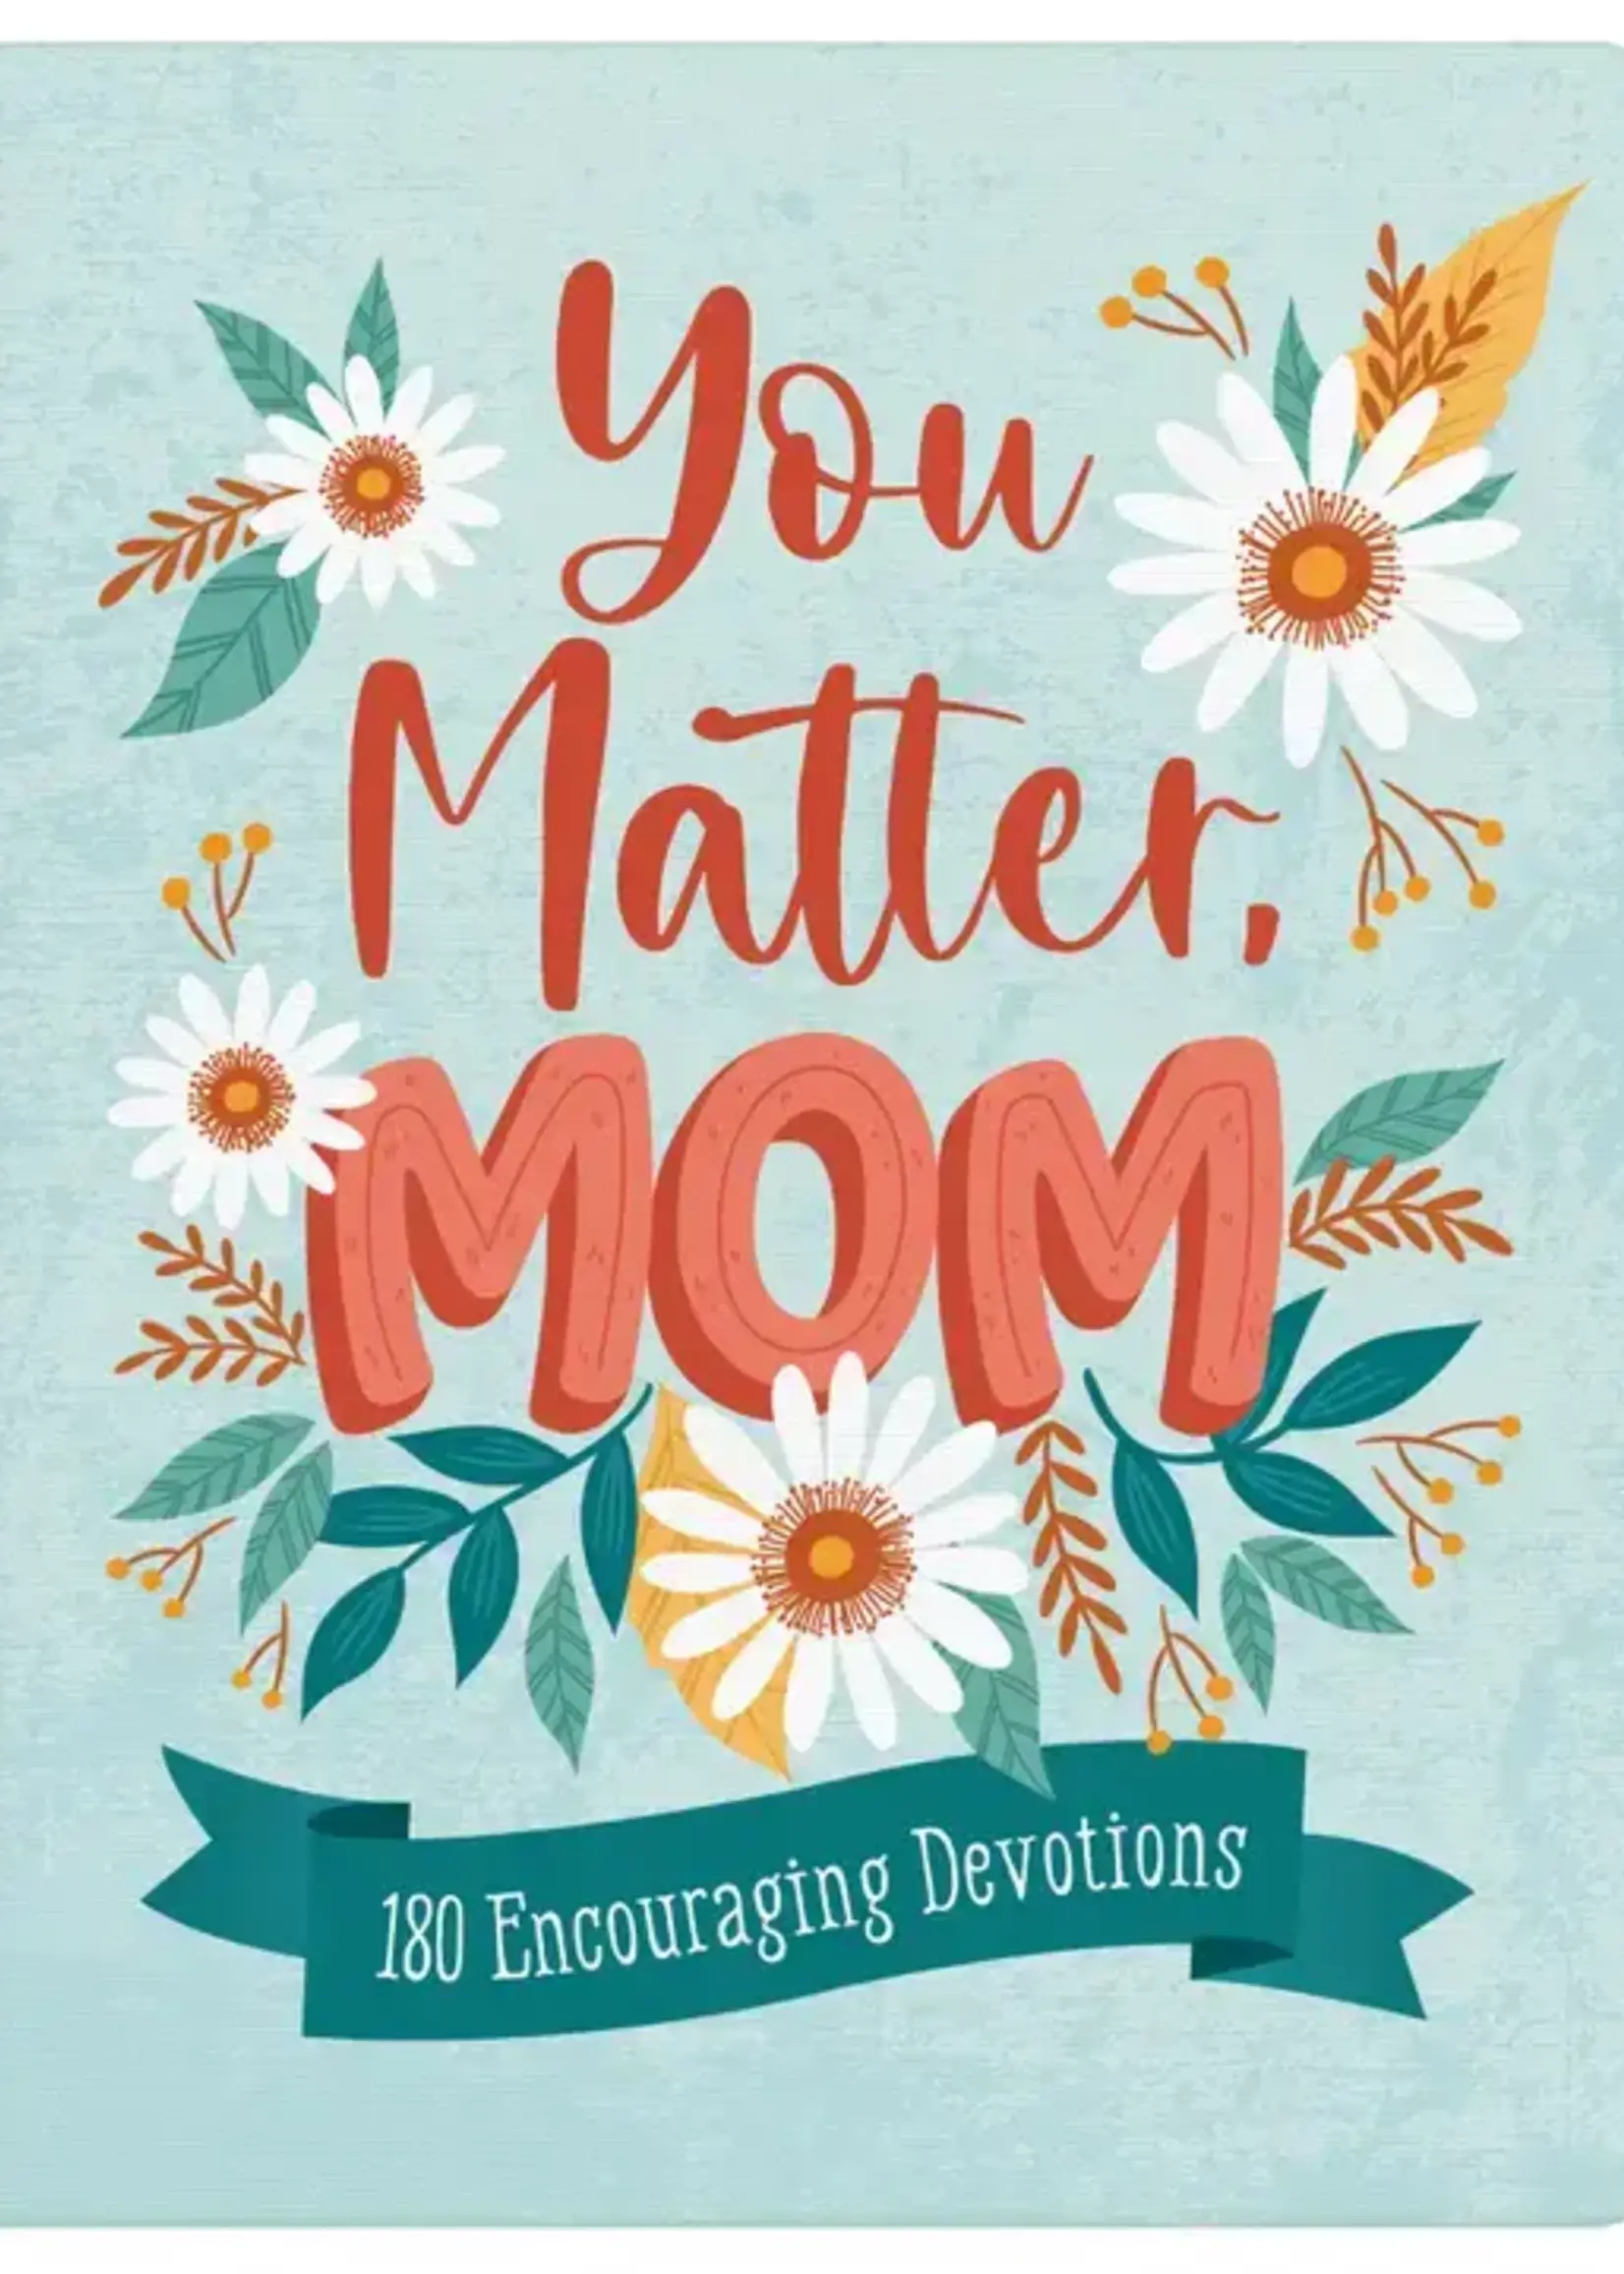 Barbour Publishing YOU MATTER MOM